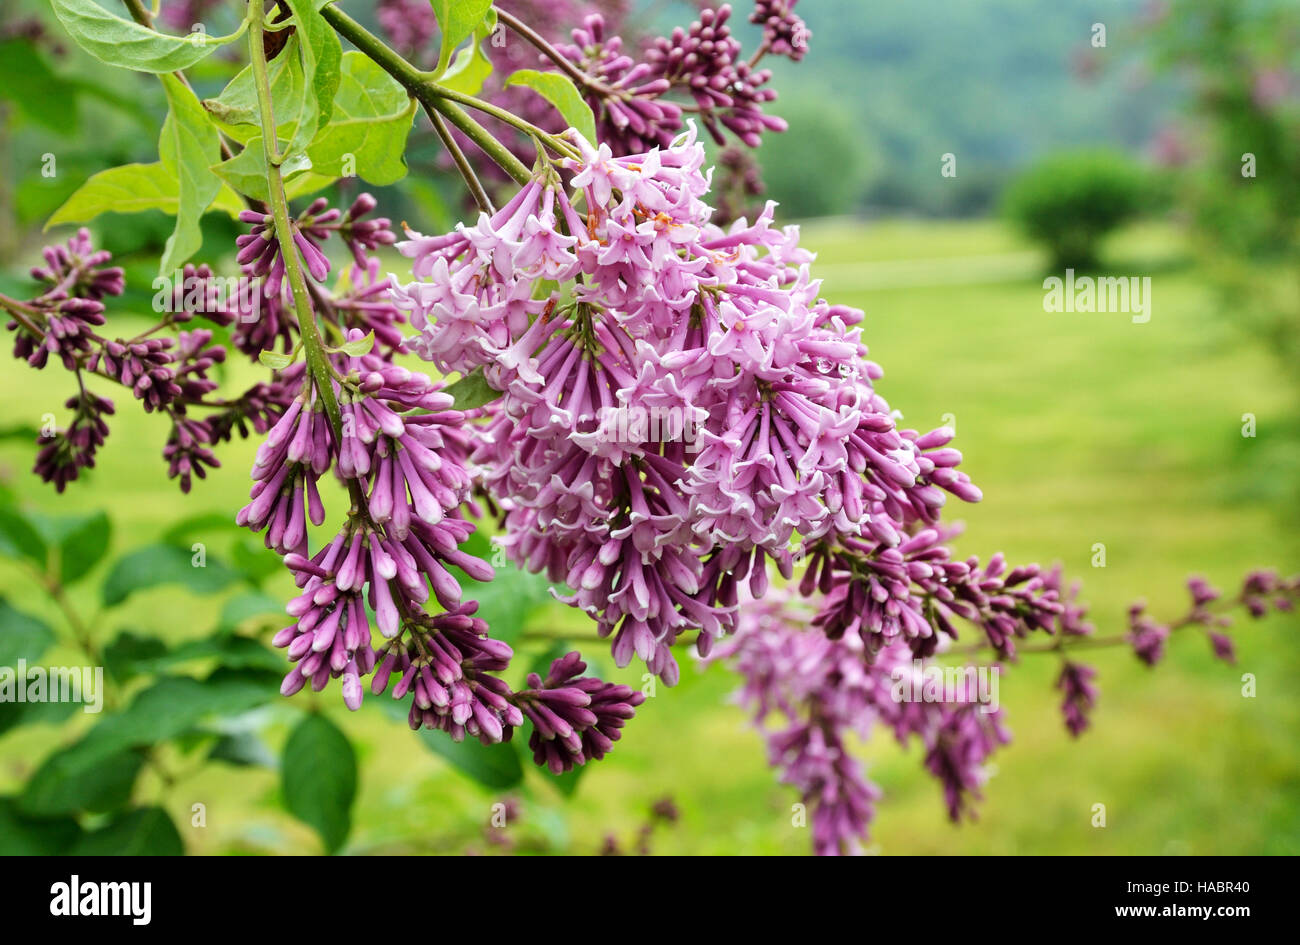 Blooming liliac in the garden Stock Photo